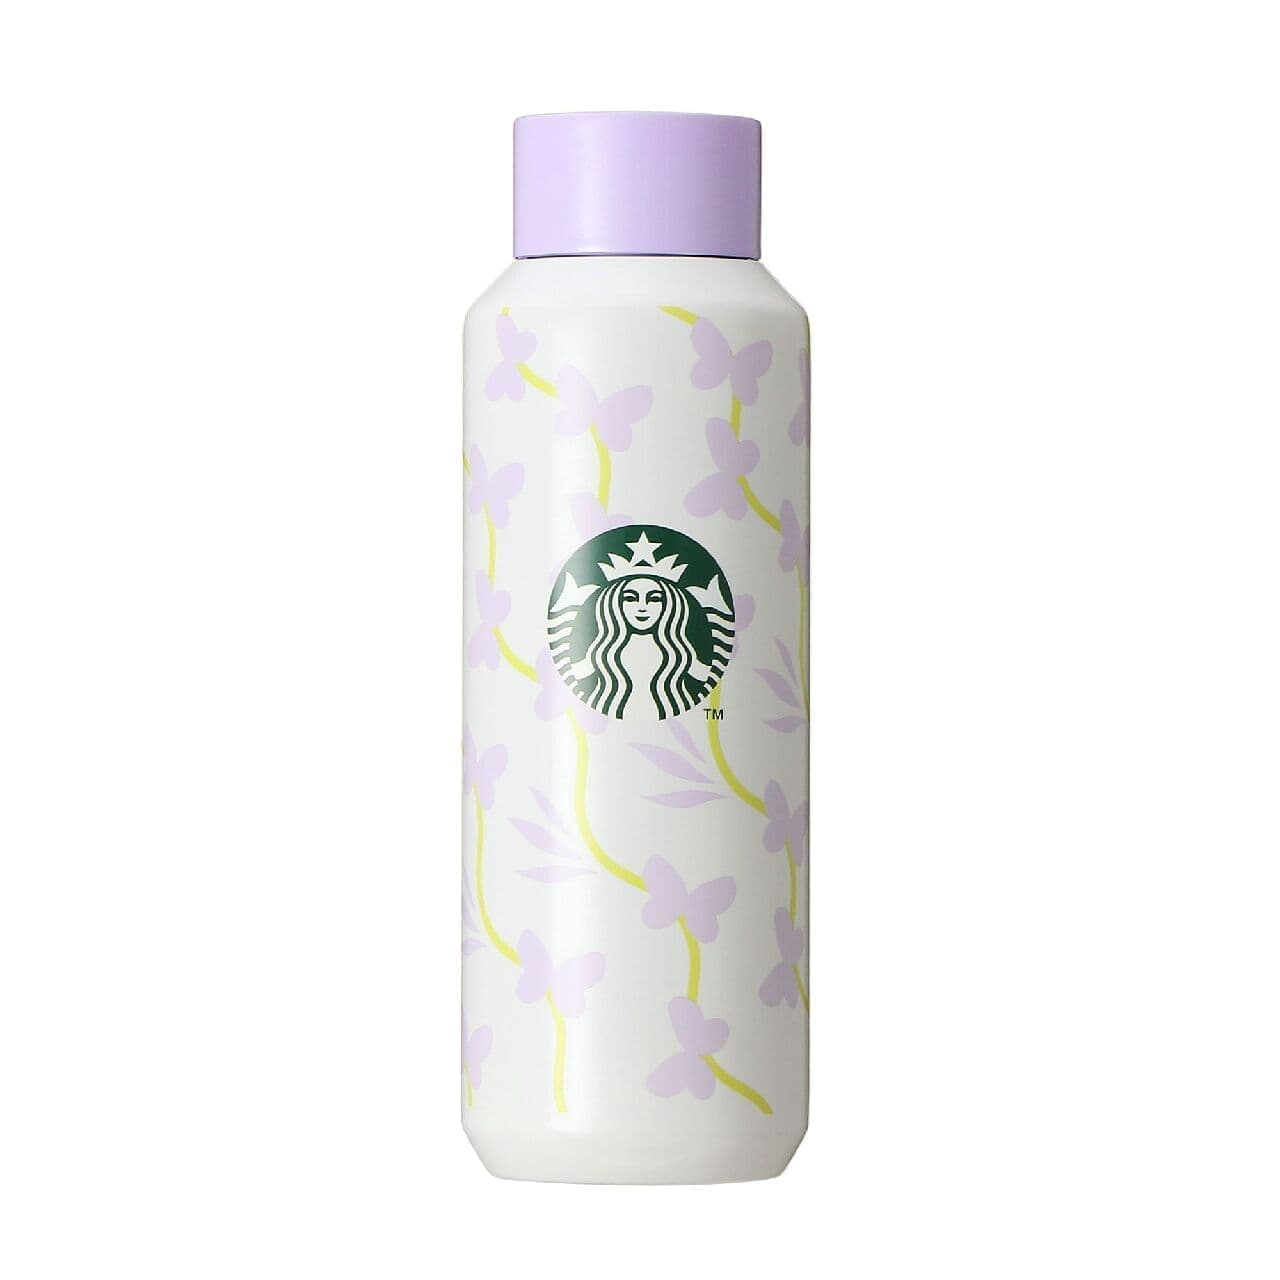 Starbucks "Stainless Steel Bottle Butterfly", "Mug Spring Prism" and other new products for spring